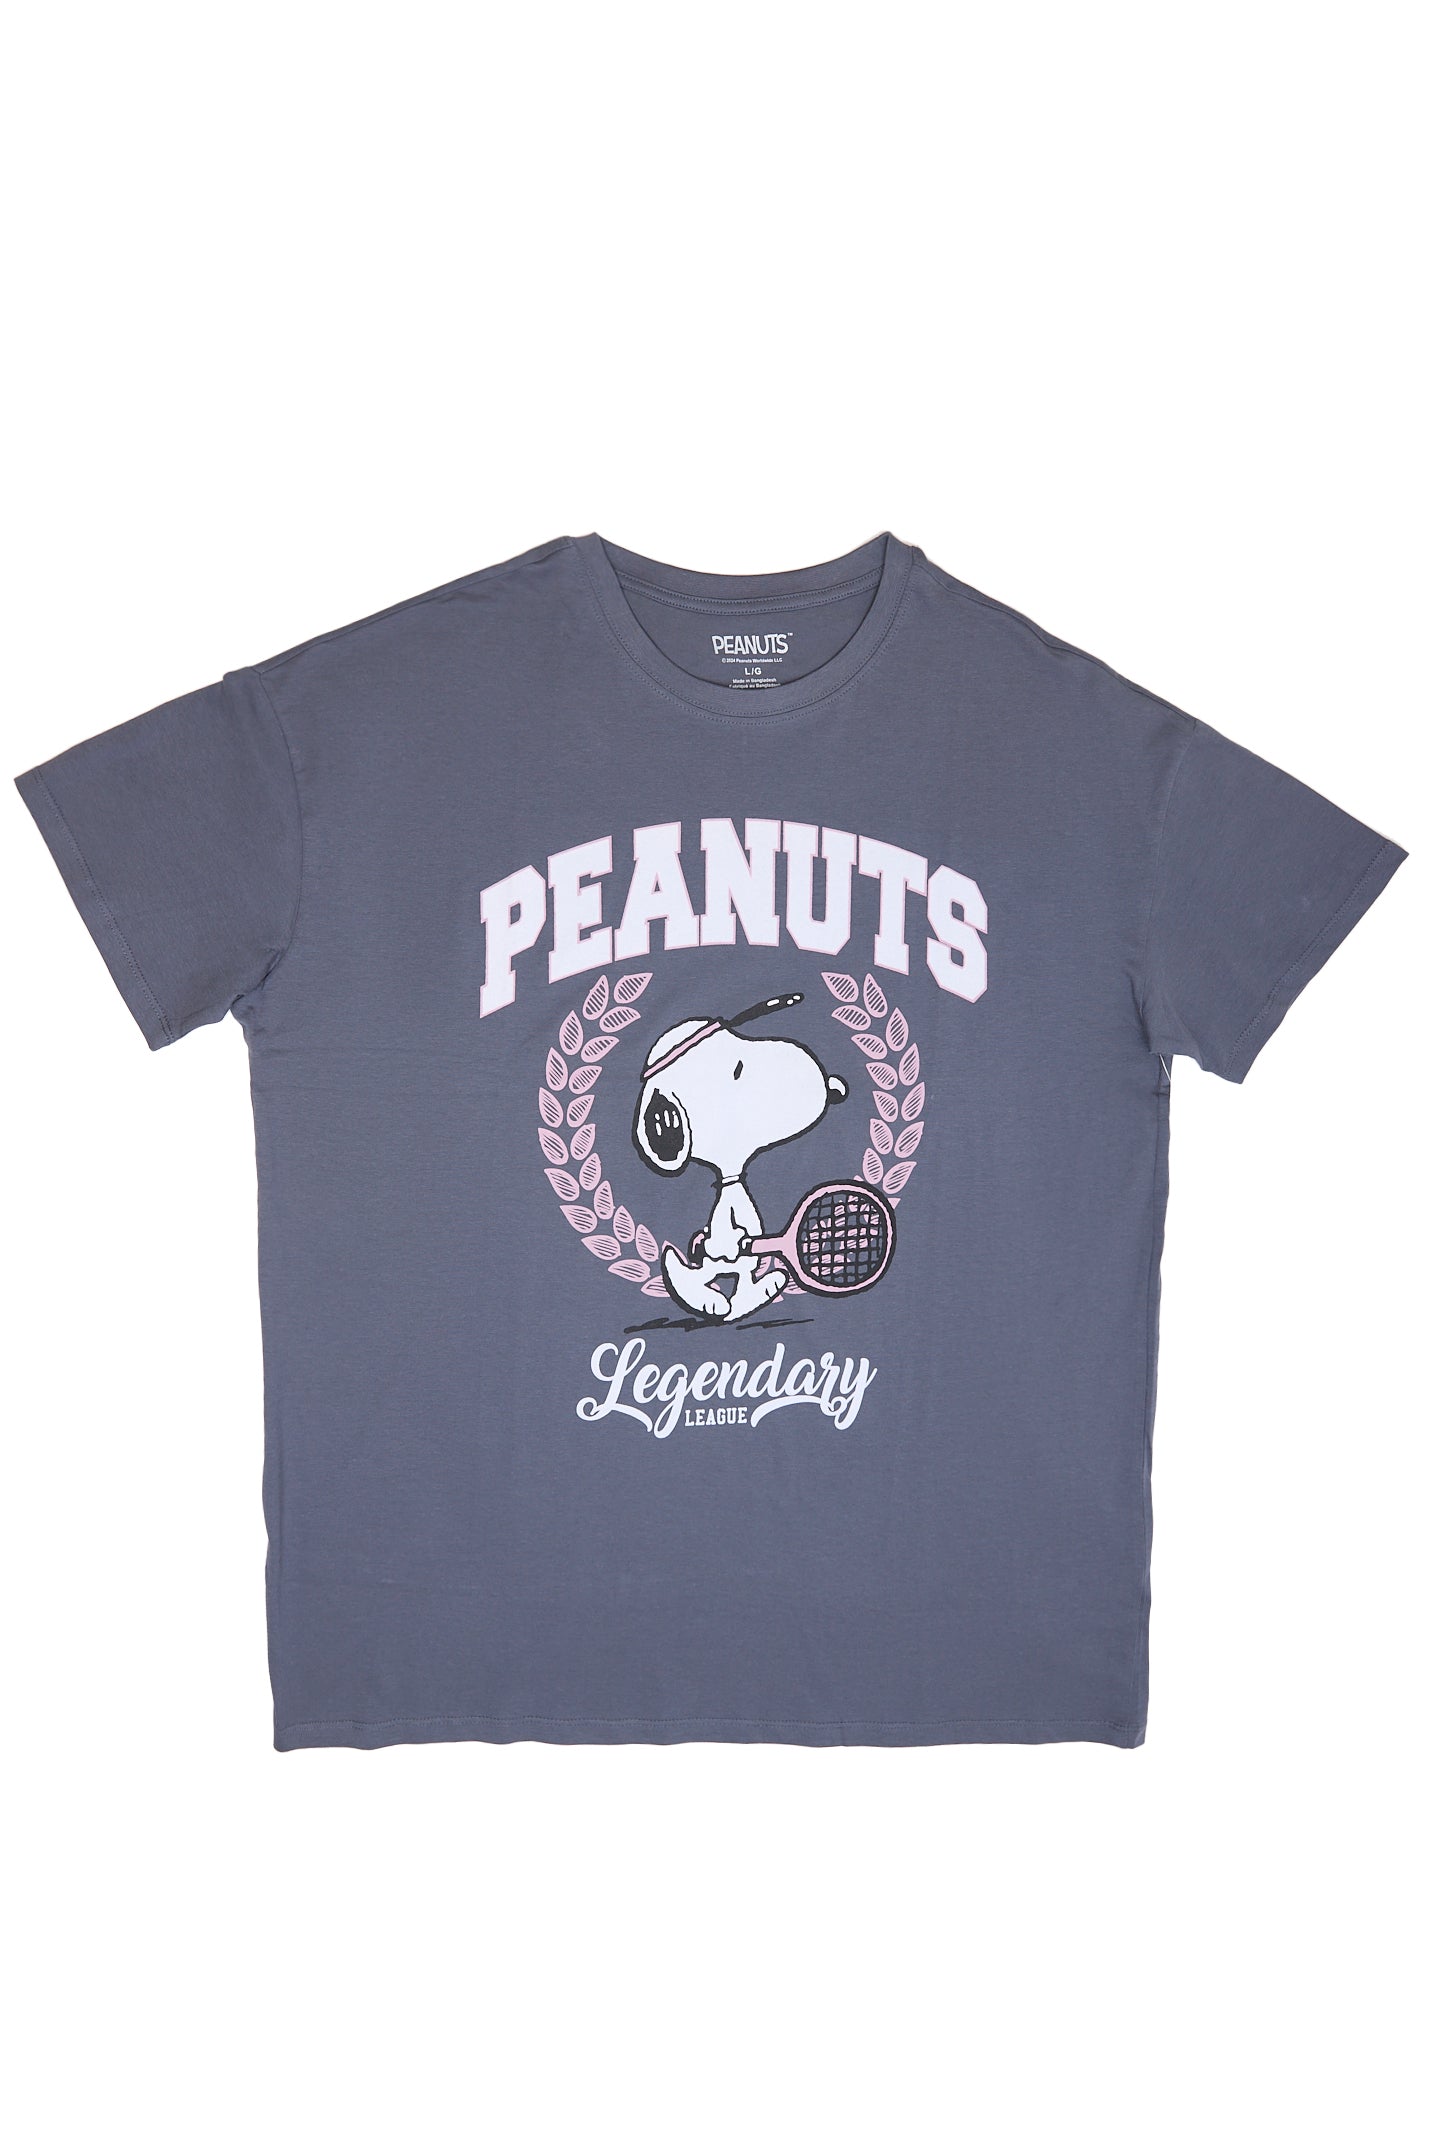 Peanuts Snoopy Legend Graphic Relaxed Tee